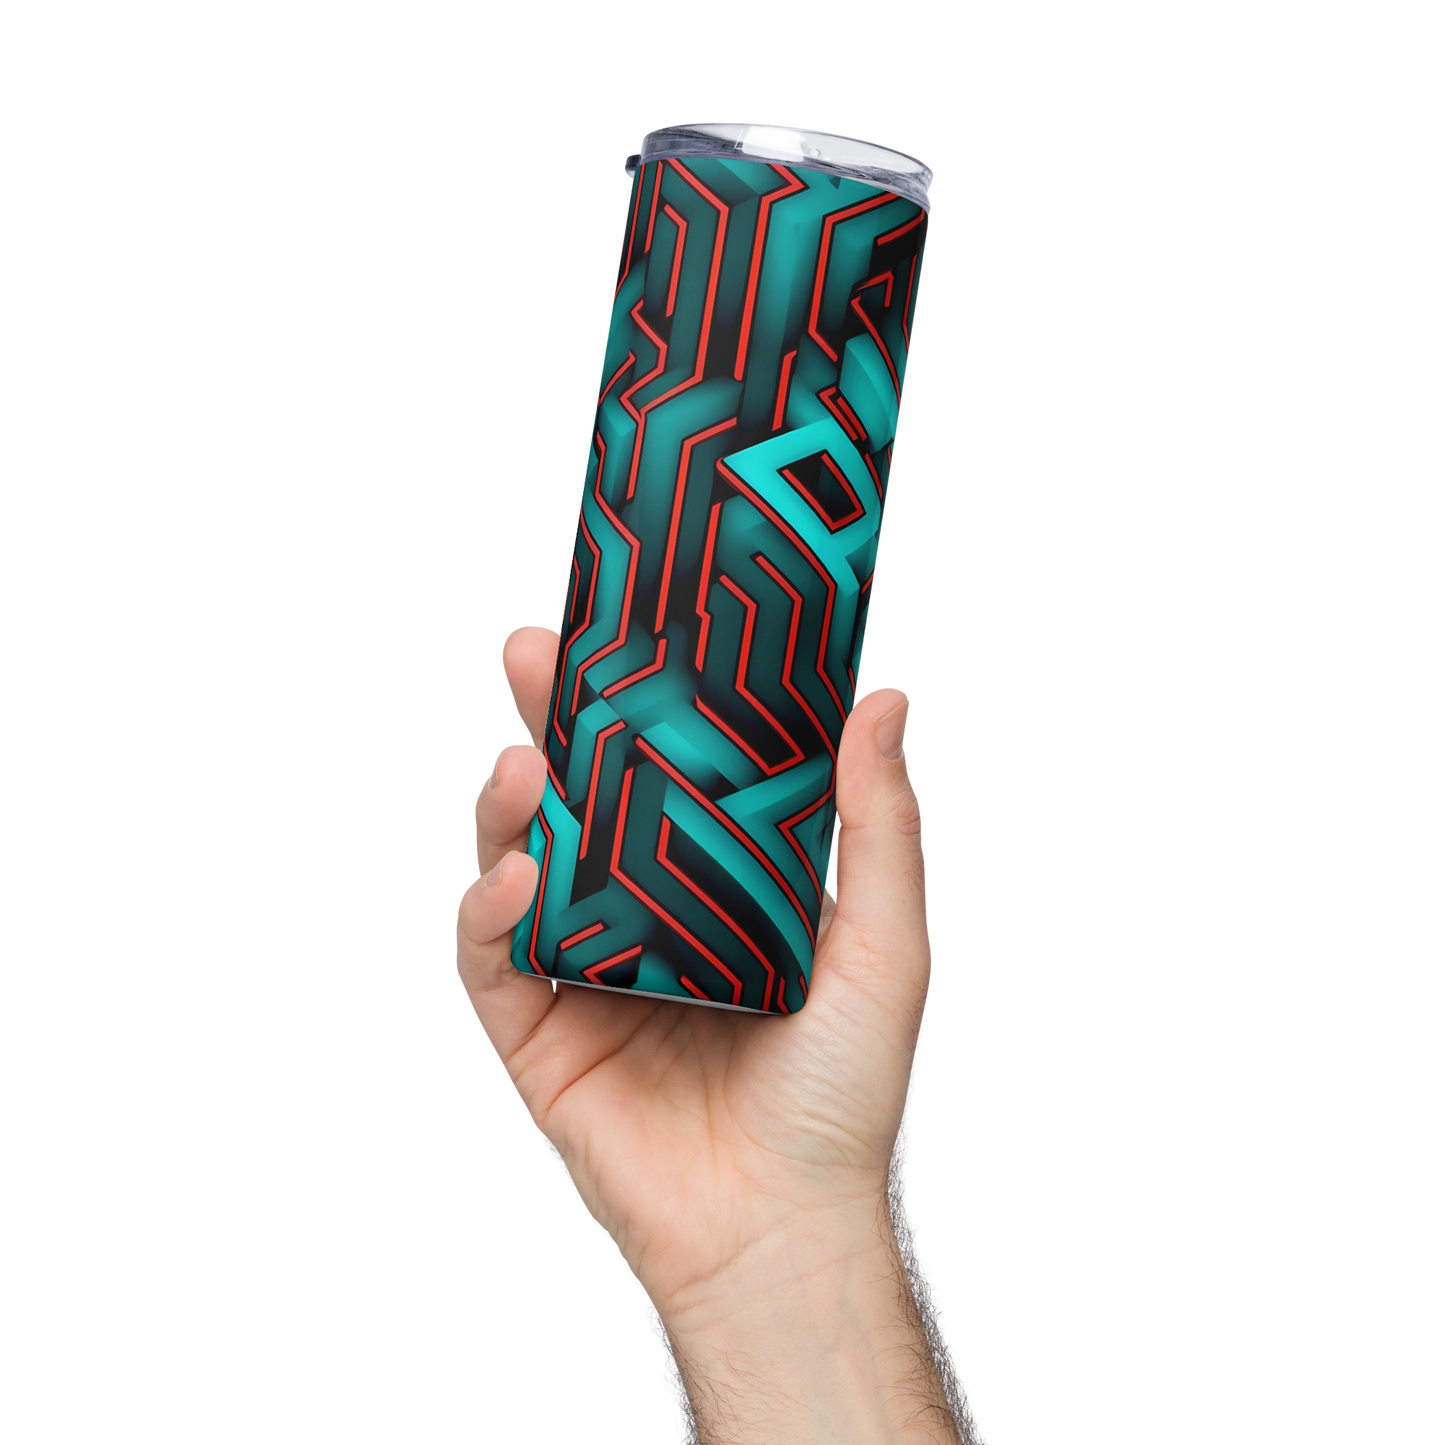 3D Maze Illusion | 3D Patterns | Stainless Steel Tumbler - #2